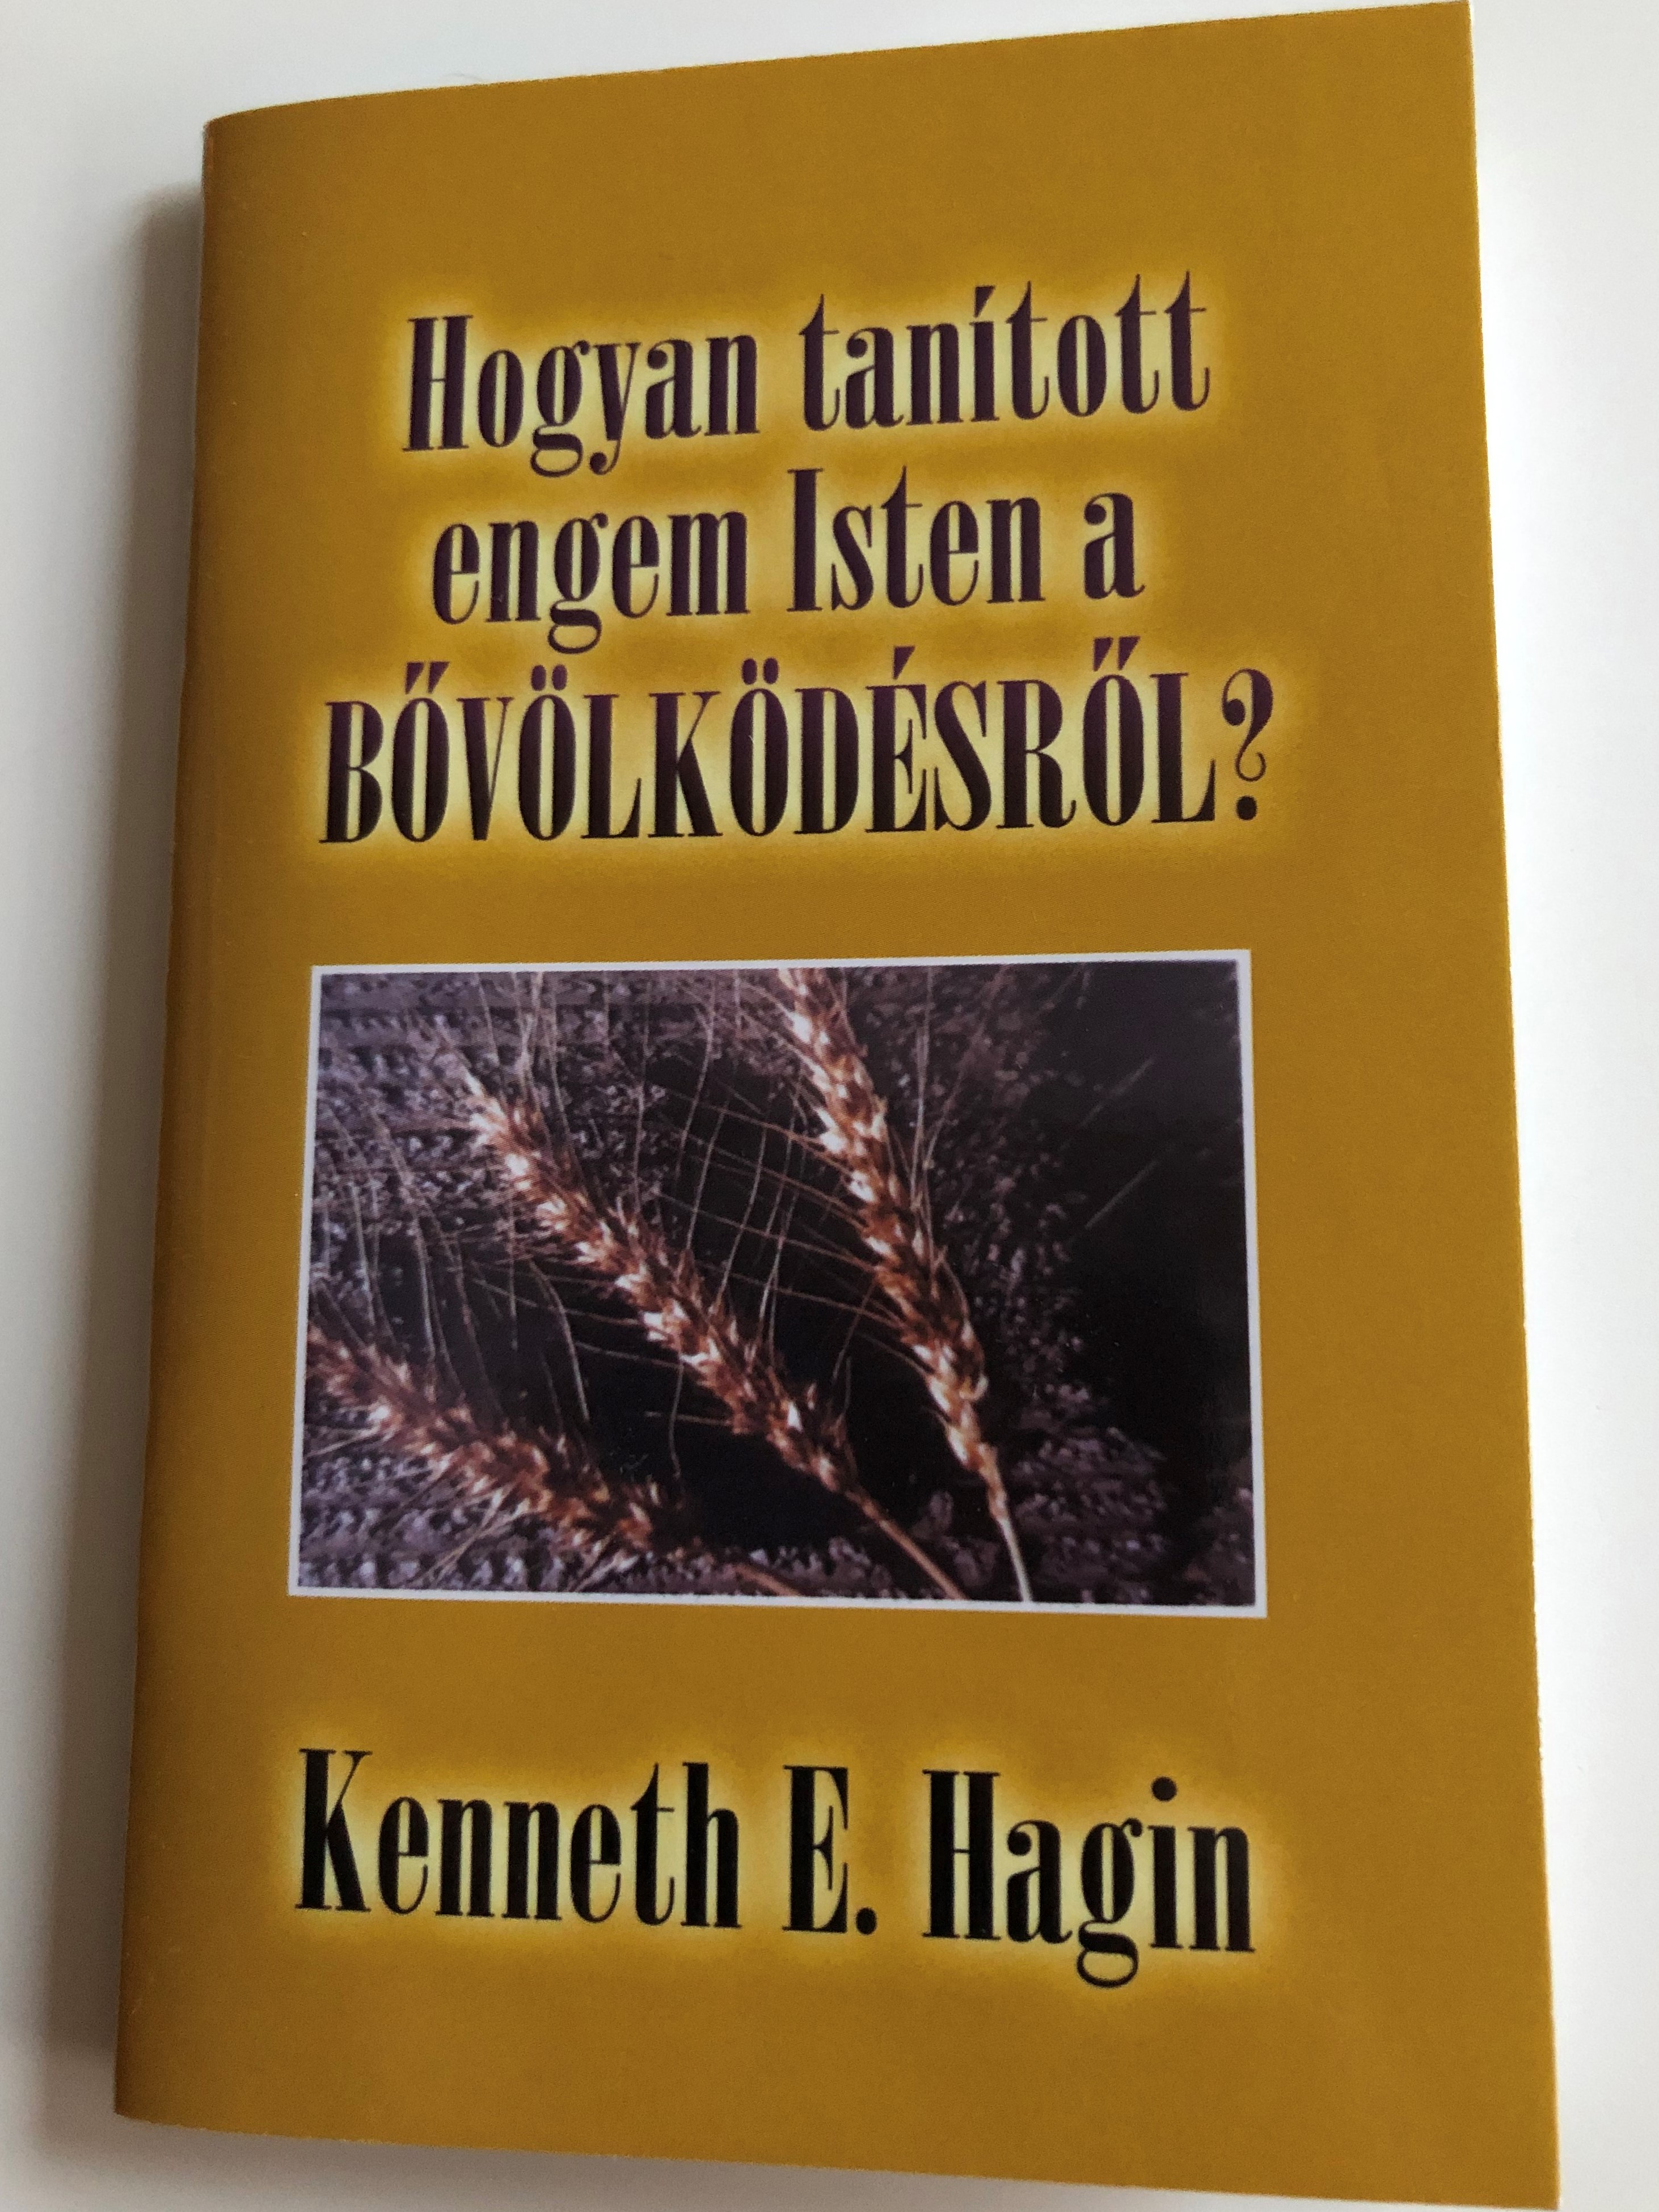 -hogyan-tan-tott-engem-isten-a-b-v-lk-d-sr-l-by-kenneth-e.-hagin-hungarian-edition-of-how-god-taught-me-about-prosperity-1-.jpg